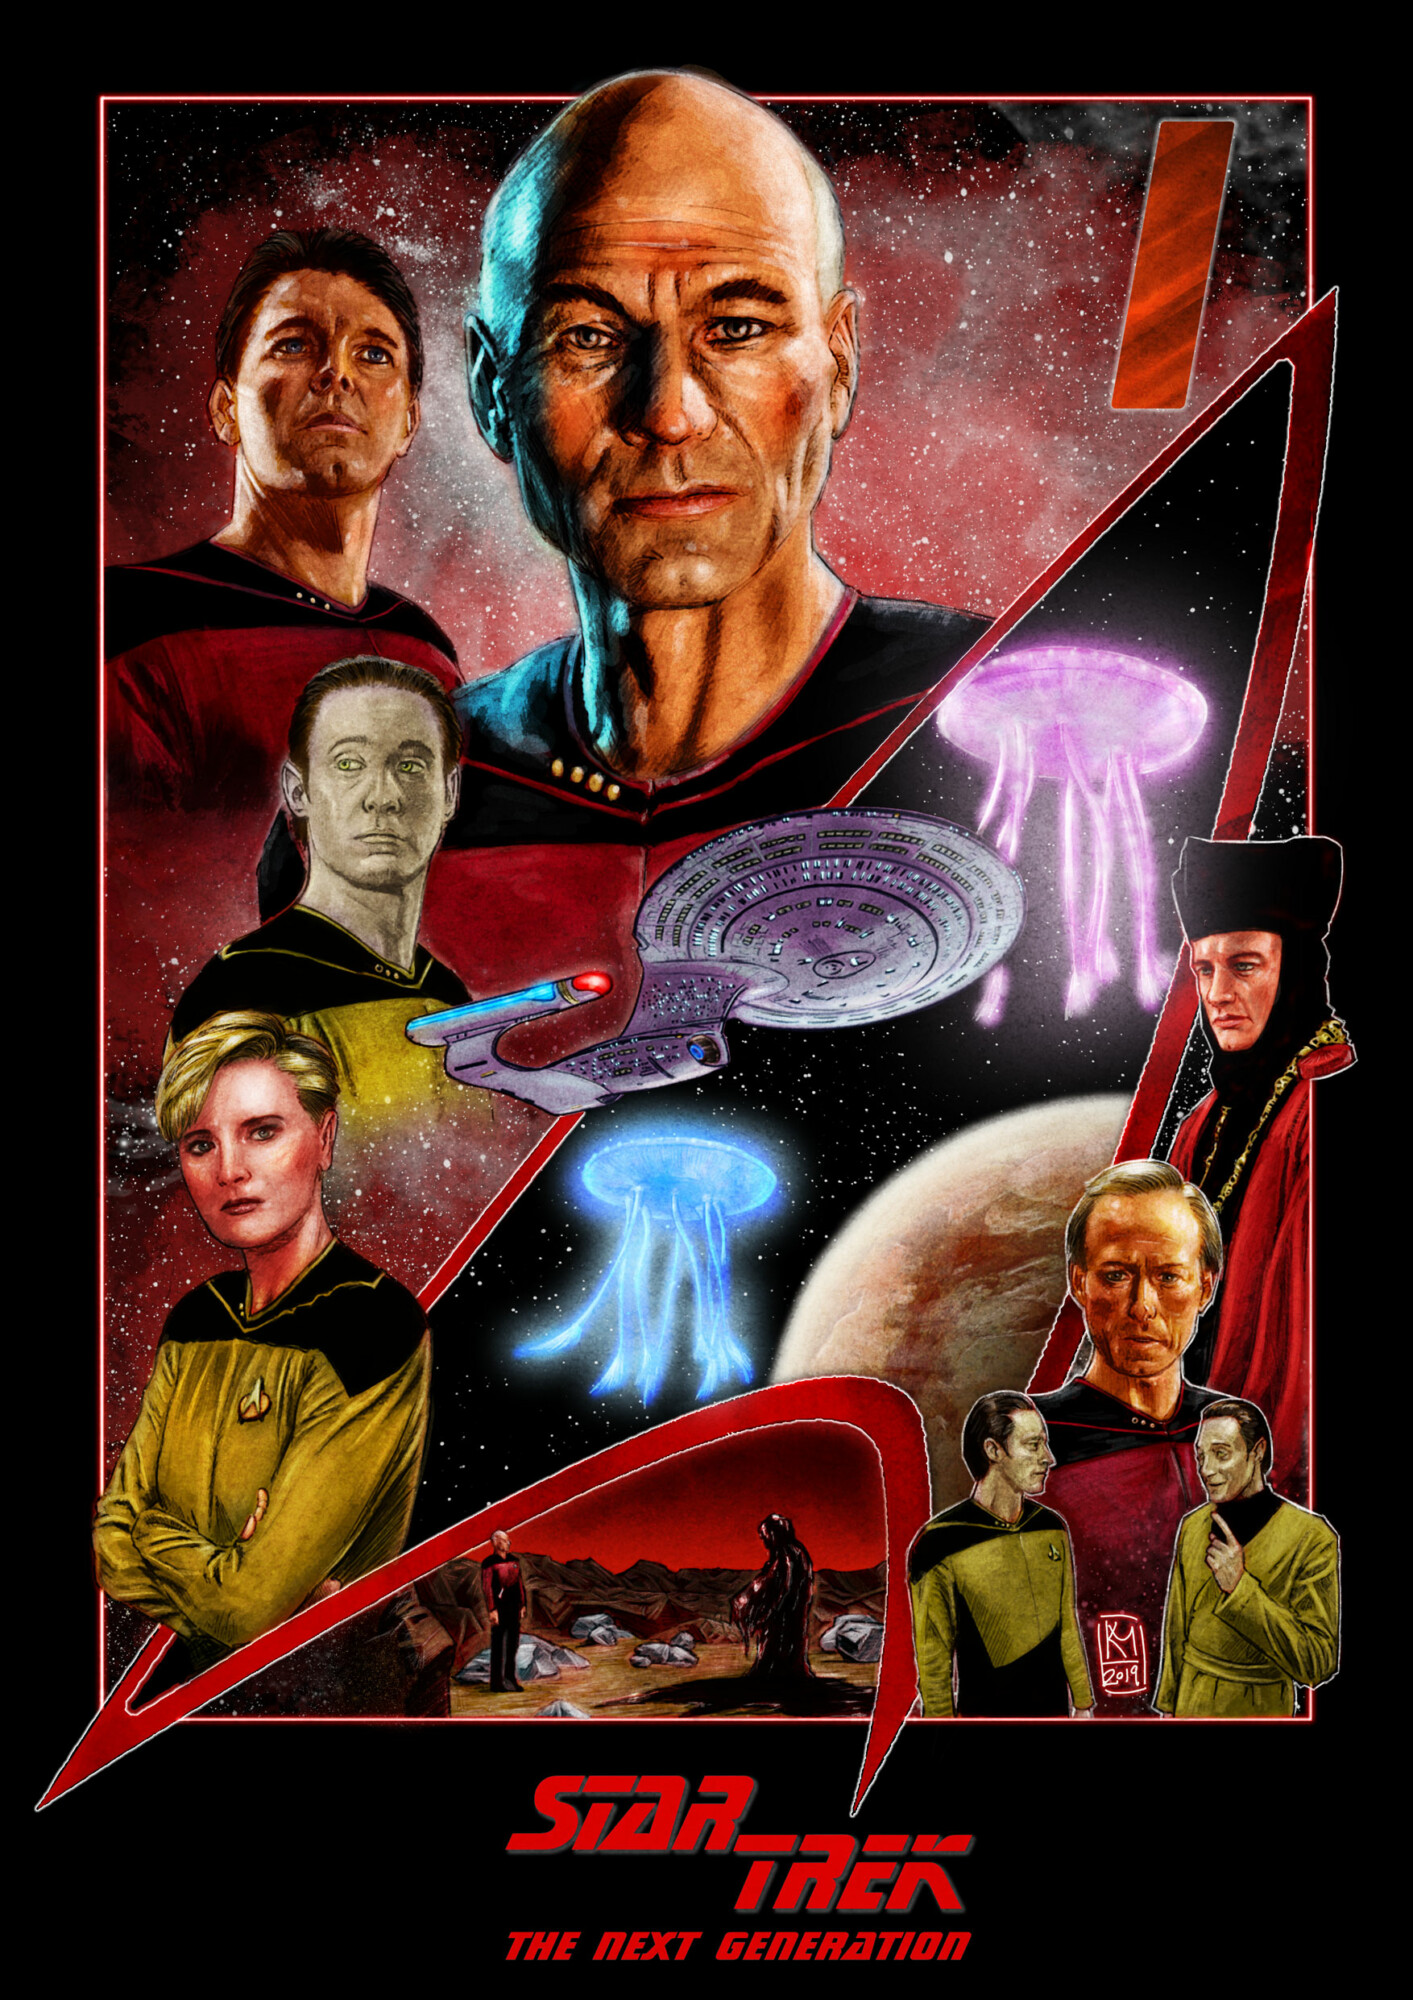 Star Trek: The Next Generation/Picard Collection | Poster By Kmadden2004